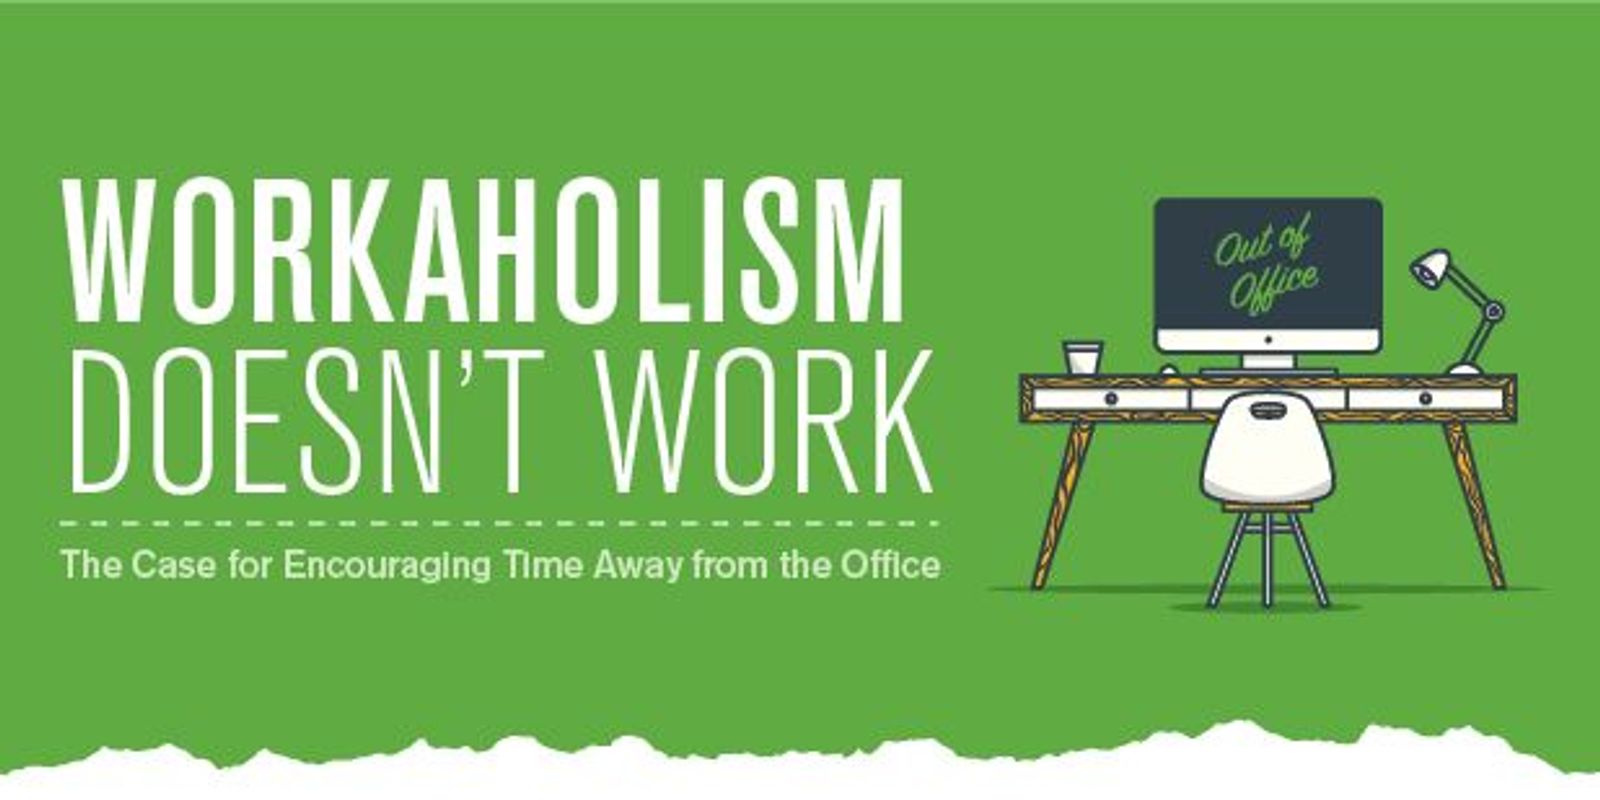 [INFOGRAPHIC]: Why Workaholism Doesn't Work: The Case for Taking a (Real) Break